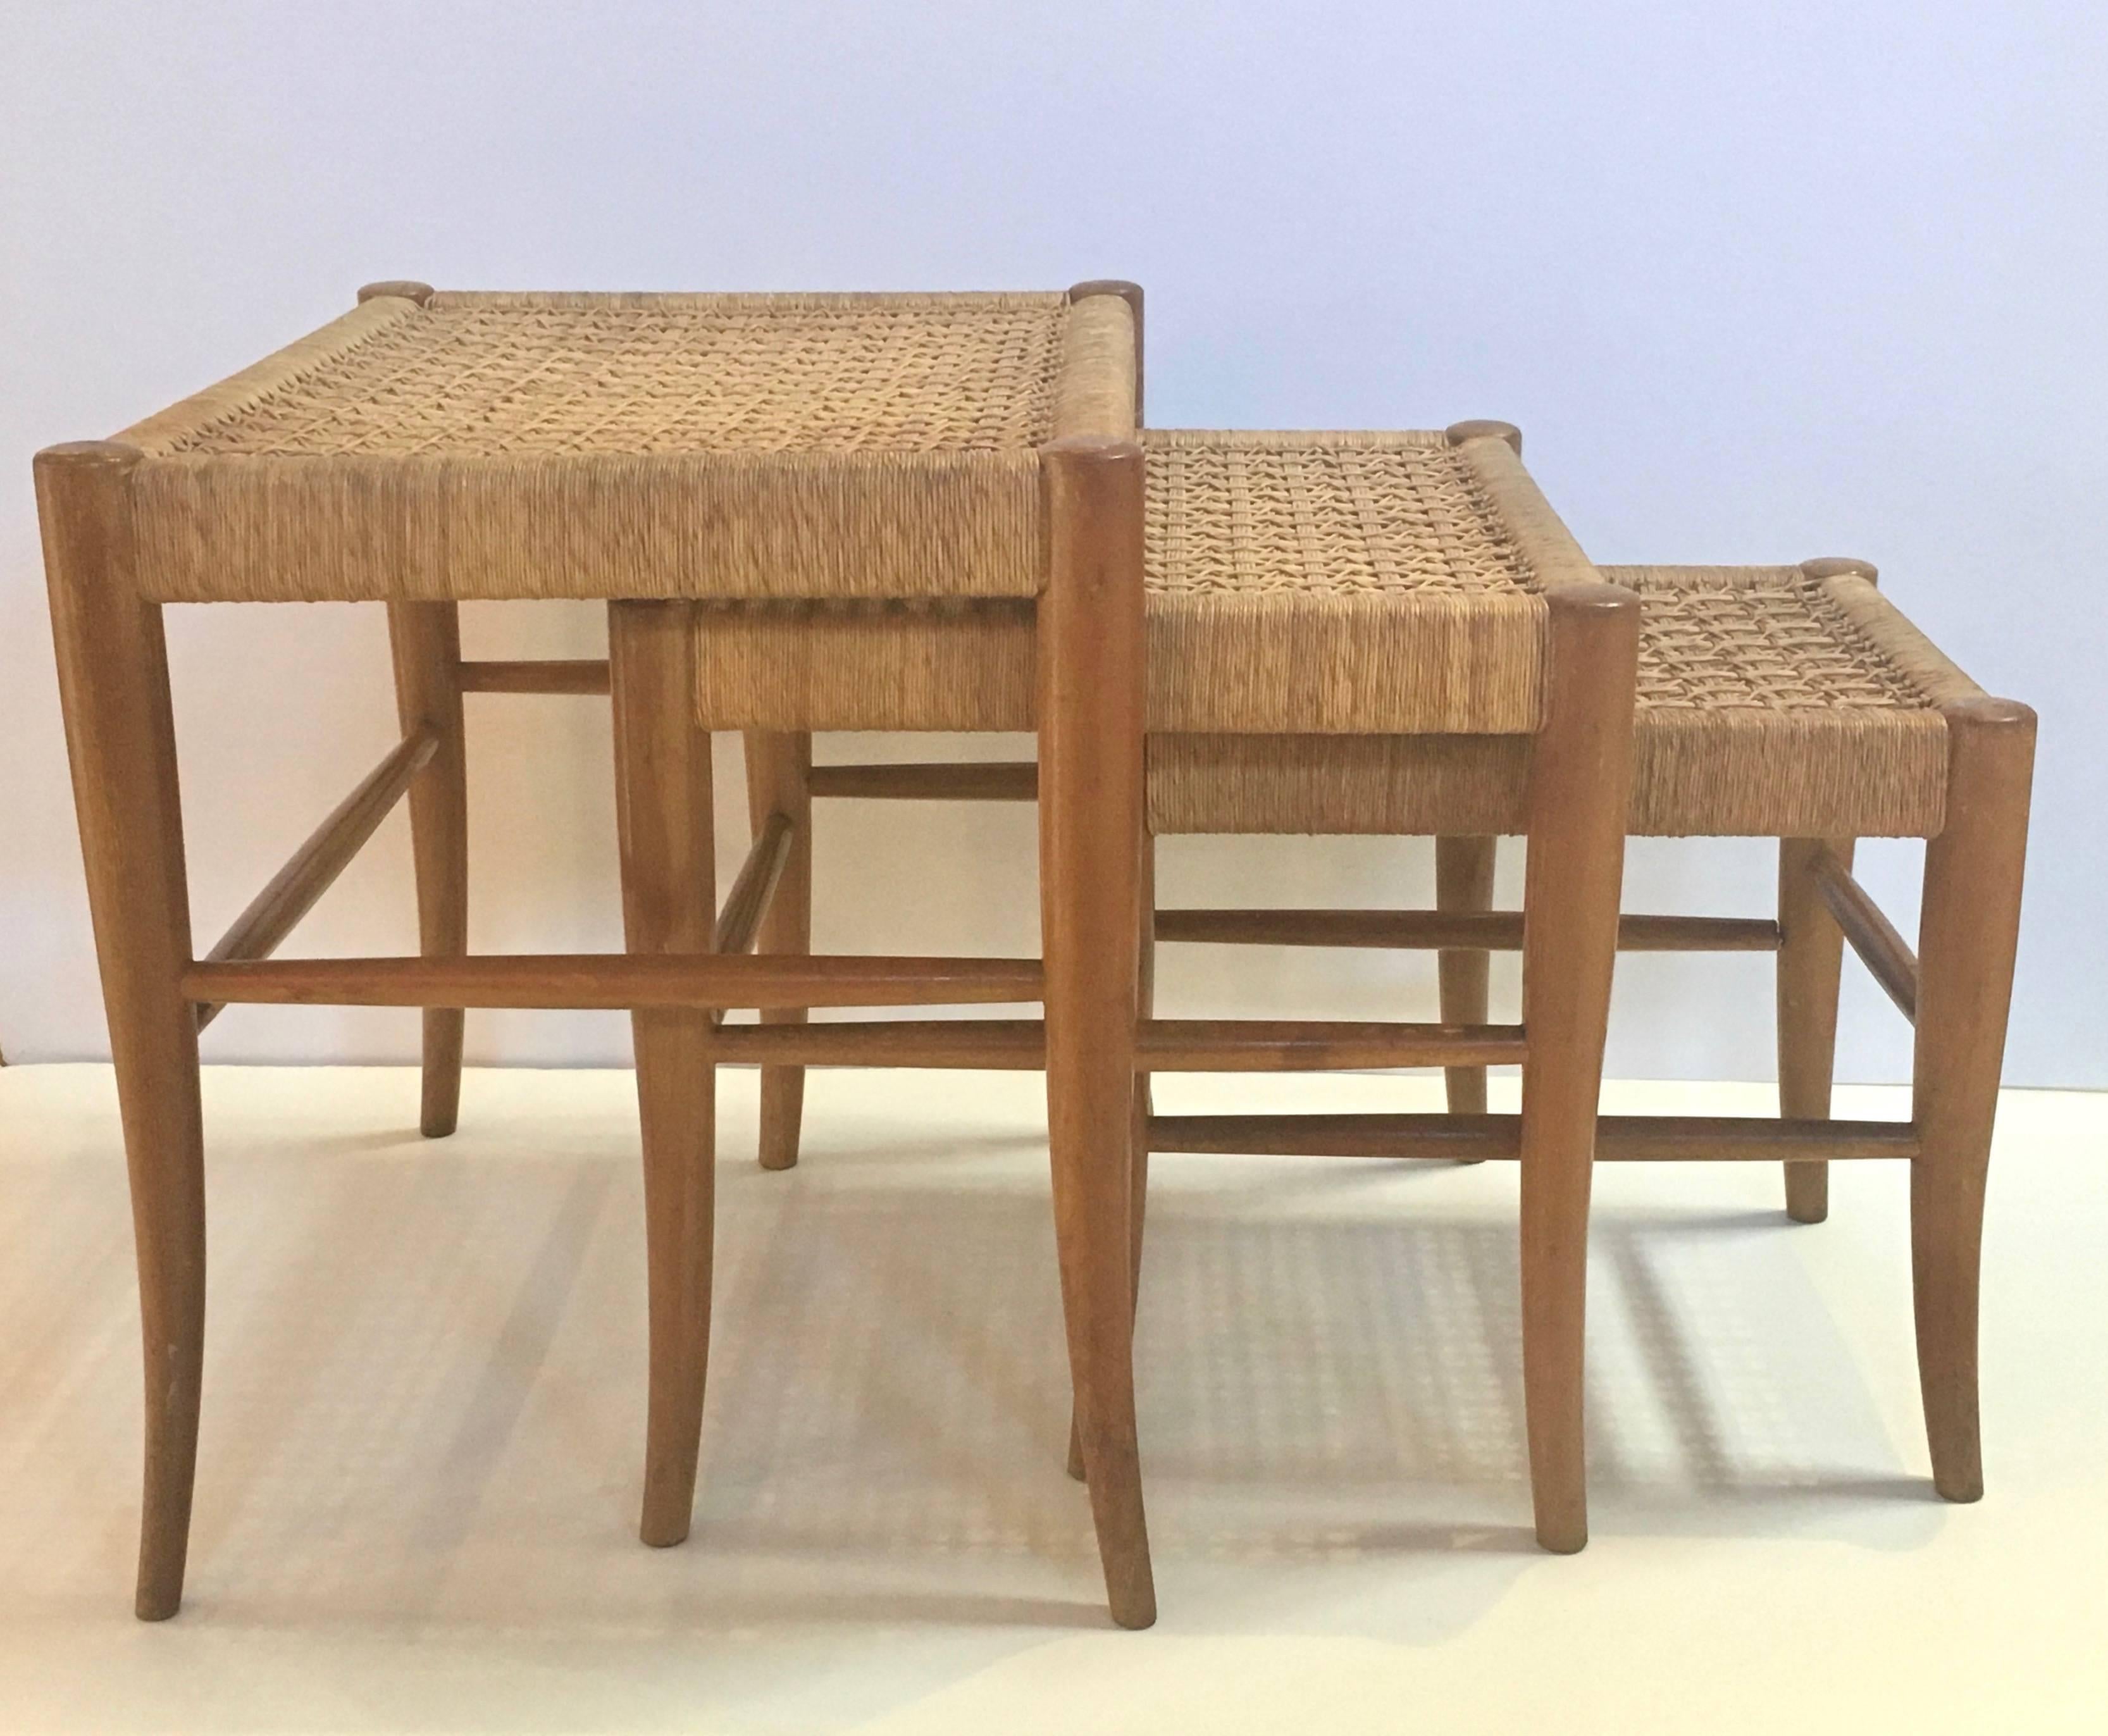 Trio of nesting tables in walnut with flared klismos leg design in manner of T.H. Robsjohn-Gibbings for Widdicomb, Stamped made in Mexico circa 1950s, by AMH company, and purchased in Palm Beach, Fl. 
The largest table measures 20 inches long, 15